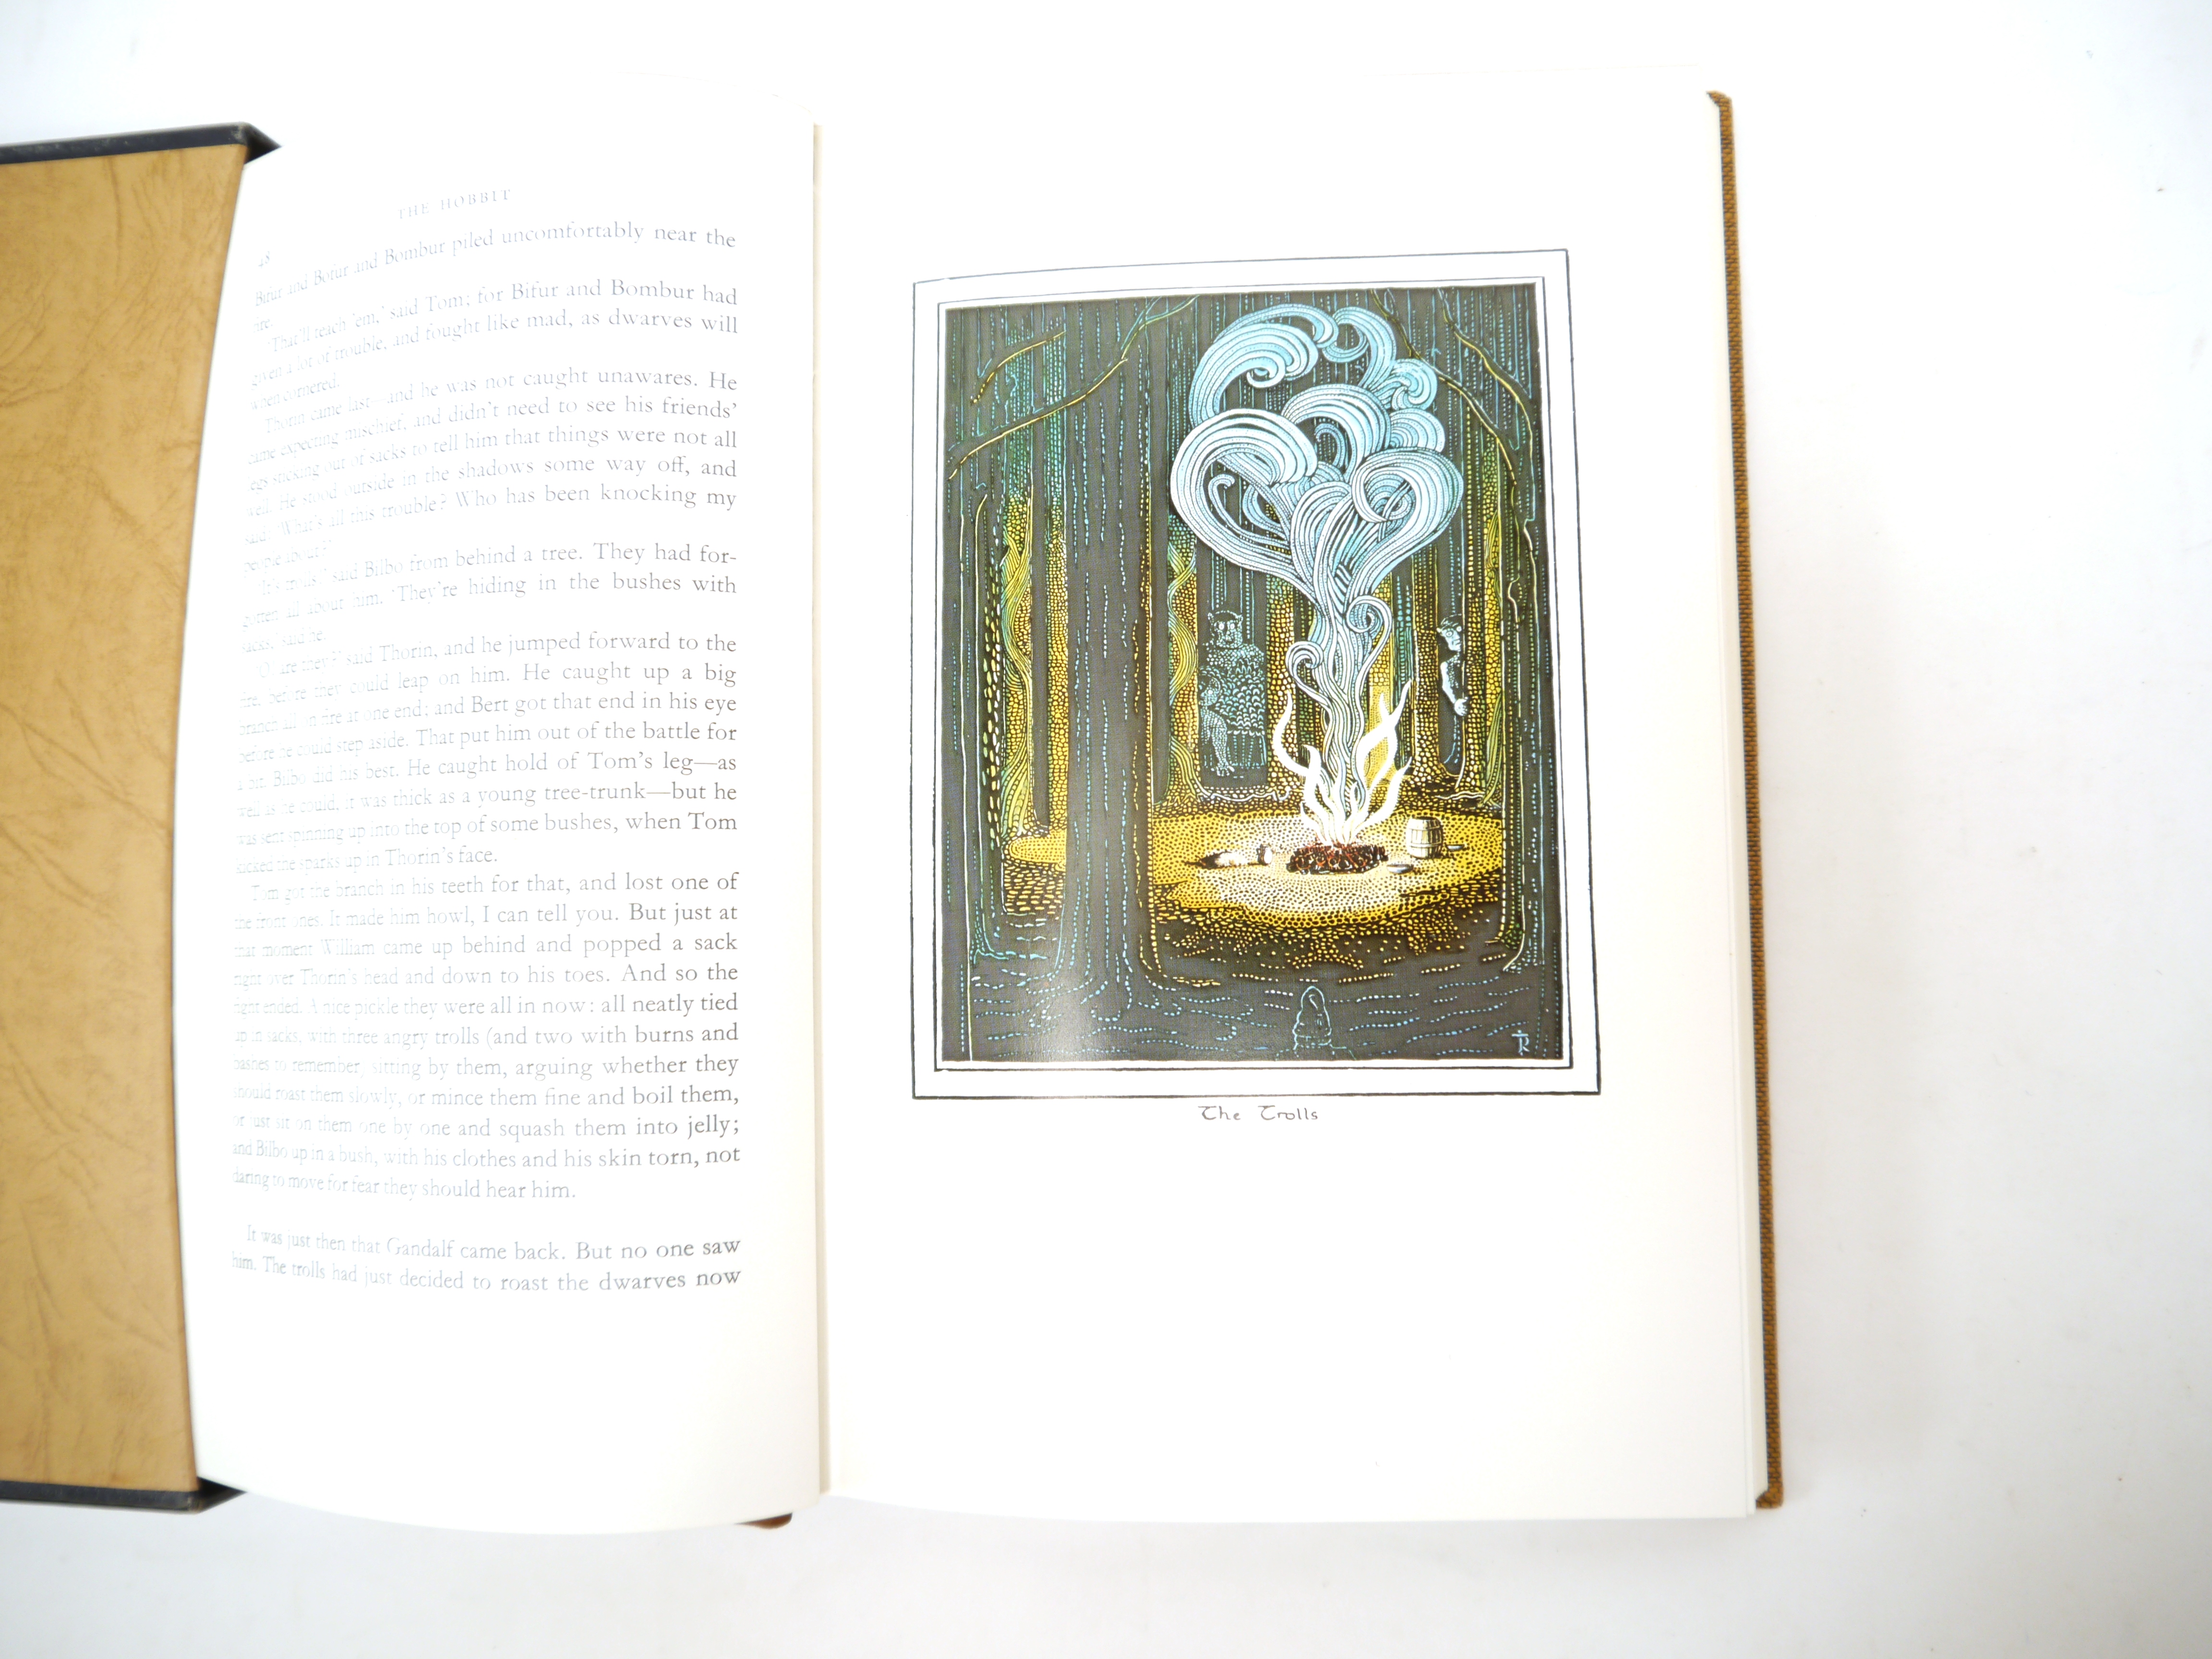 J.R.R. Tolkien: 'The Hobbit, or There and Back Again', London, George Allen & Unwin Ltd. for the - Image 4 of 6